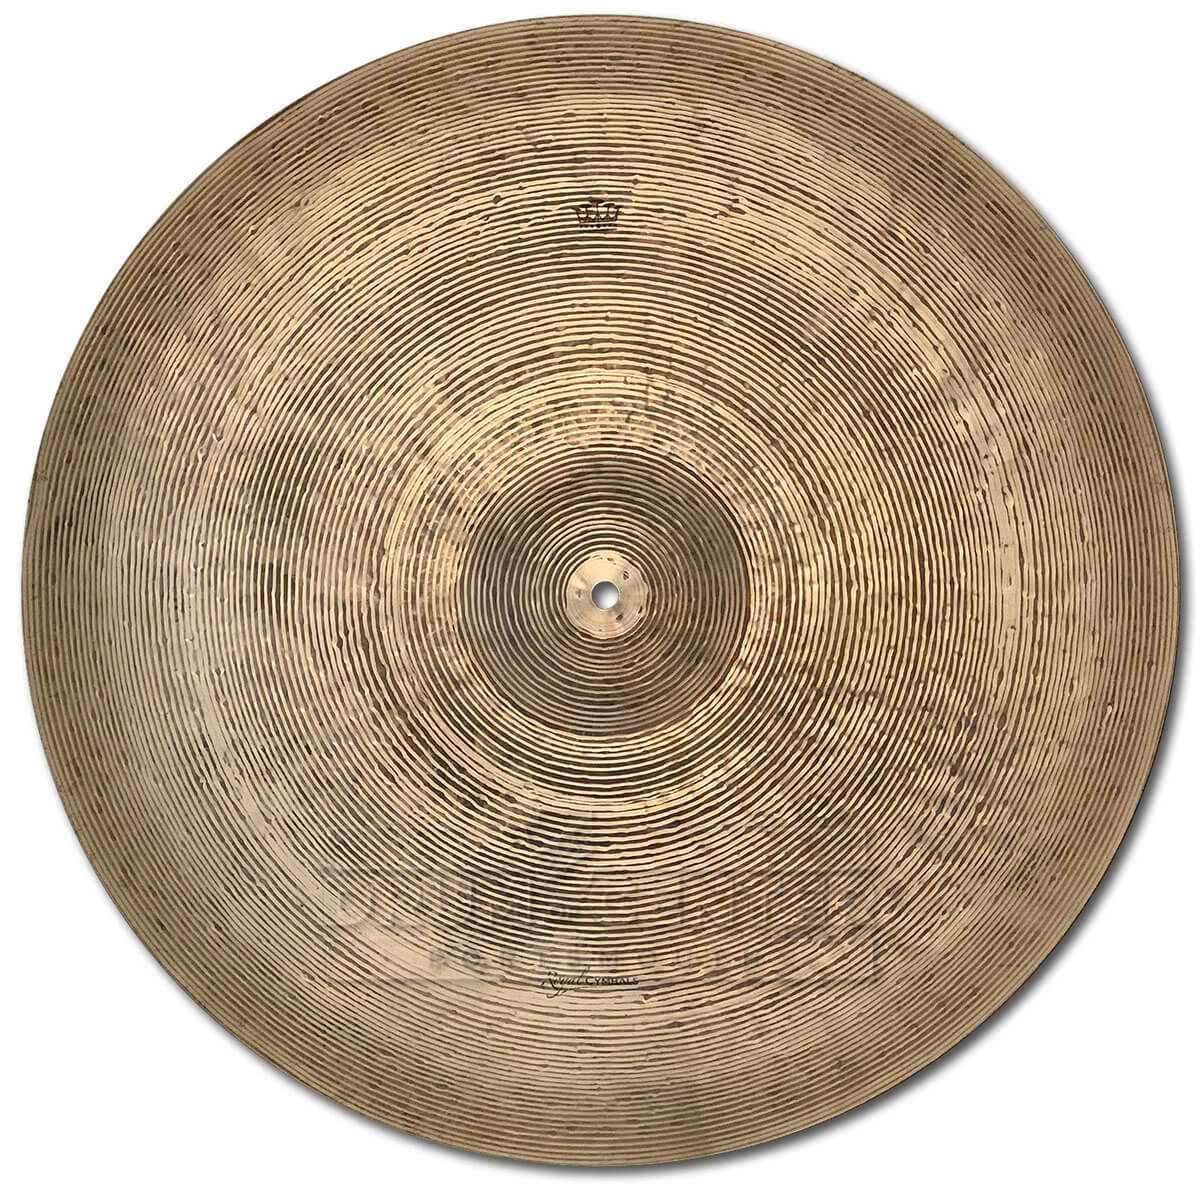 Royal Cymbals Royal Dry Crash Ride Cymbal 22" 2768 grams - Drum Center Of Portsmouth